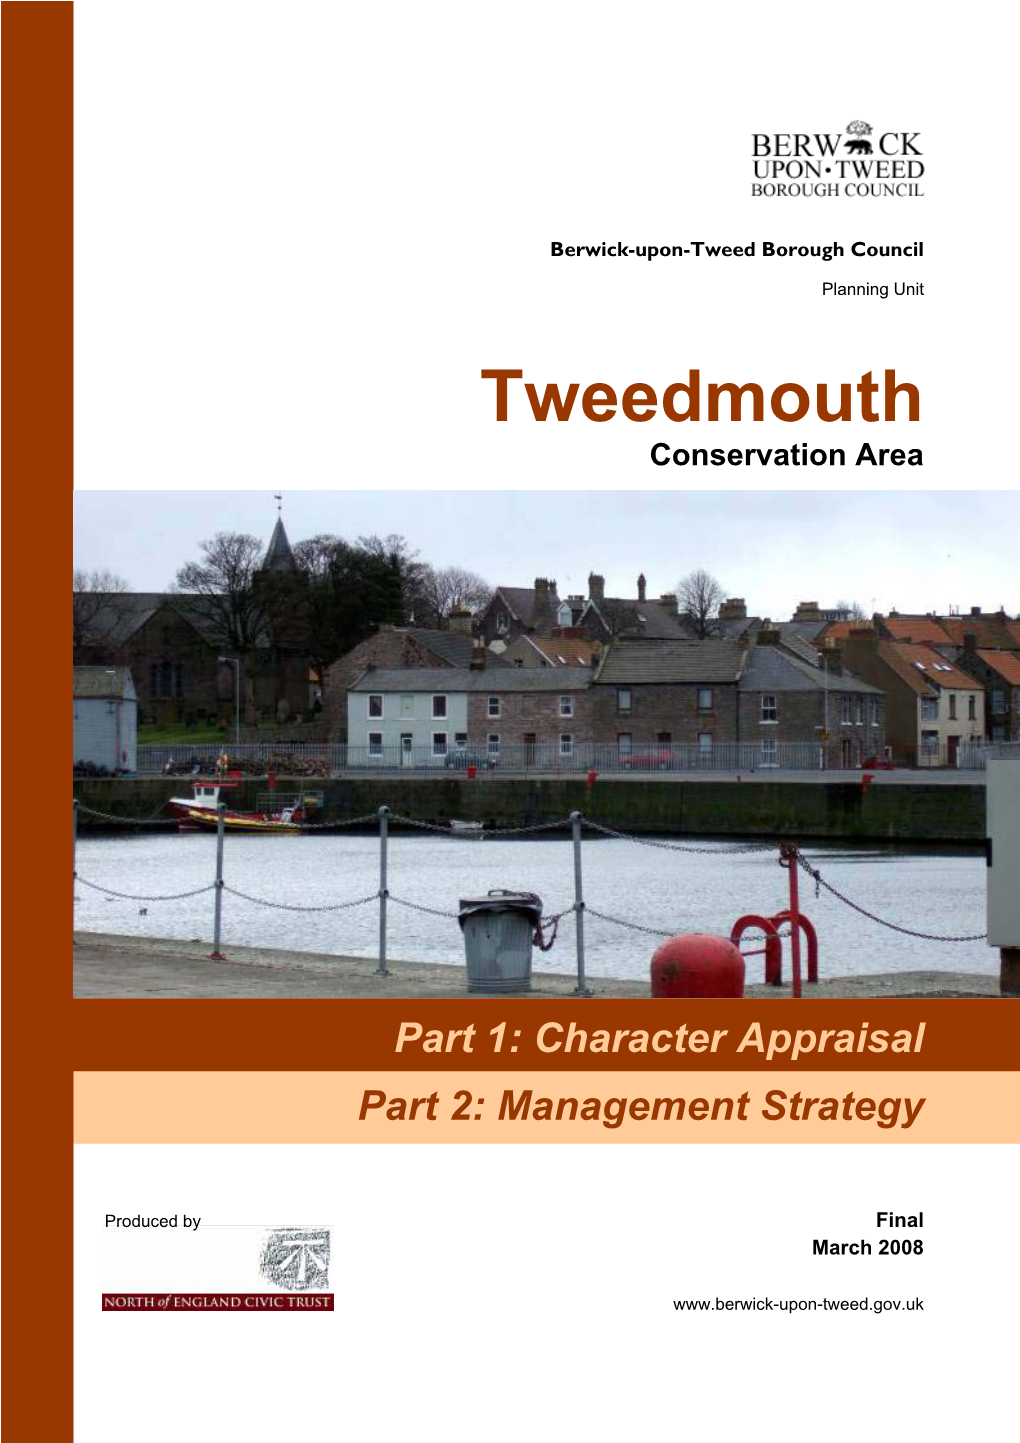 Tweedmouth Conservation Area